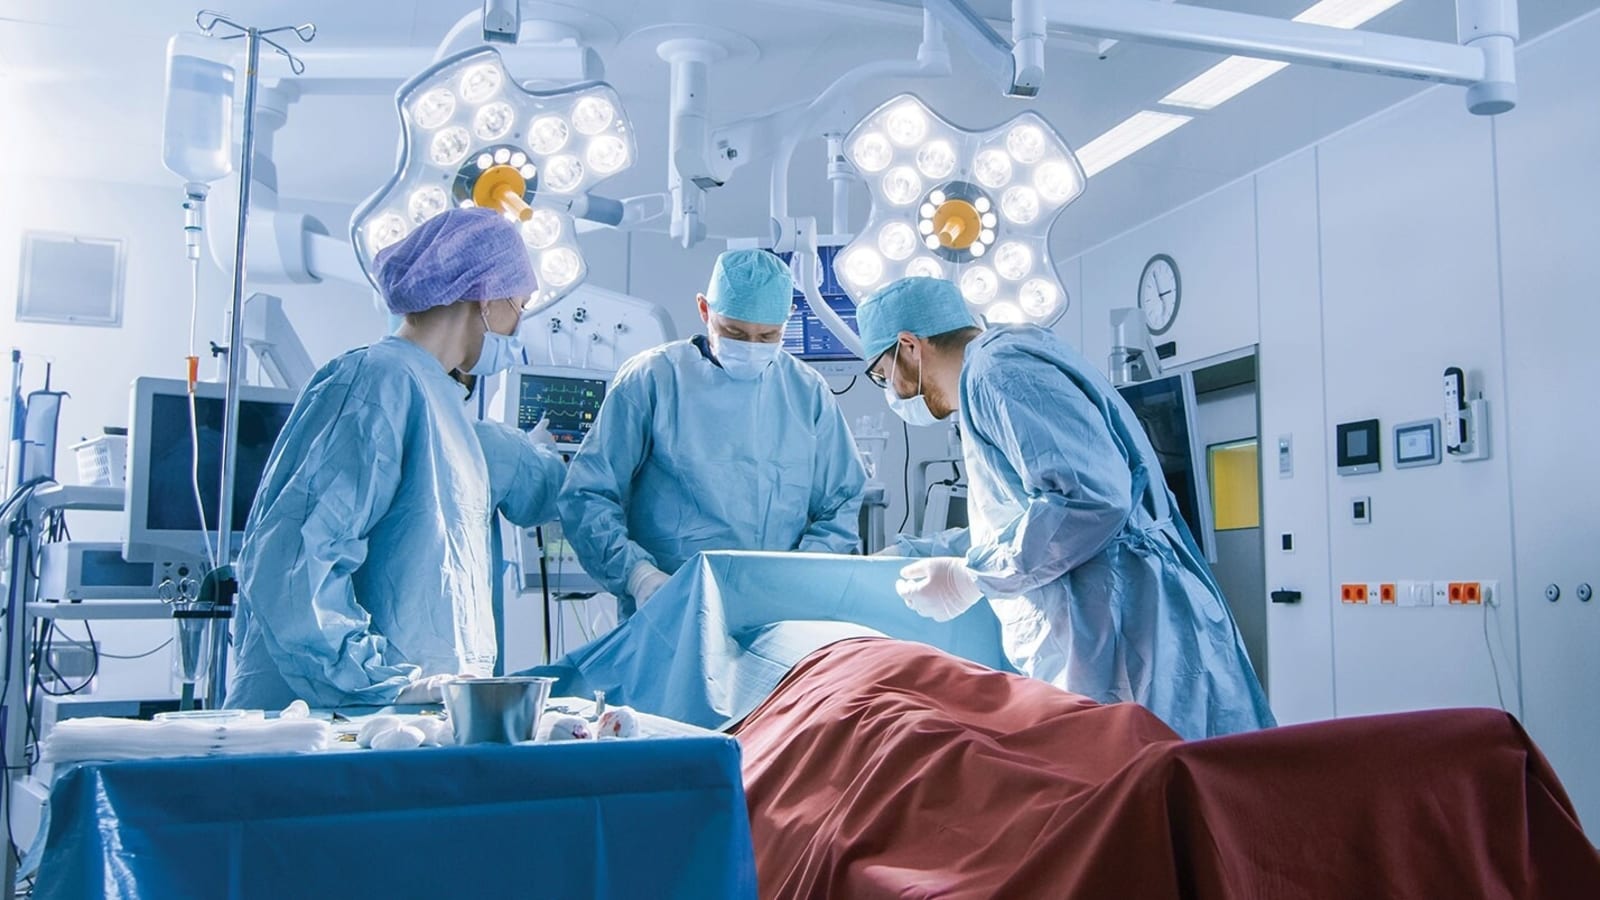 World Anaesthesia Day: Why is it observed? Here's how ether changed surgery forever